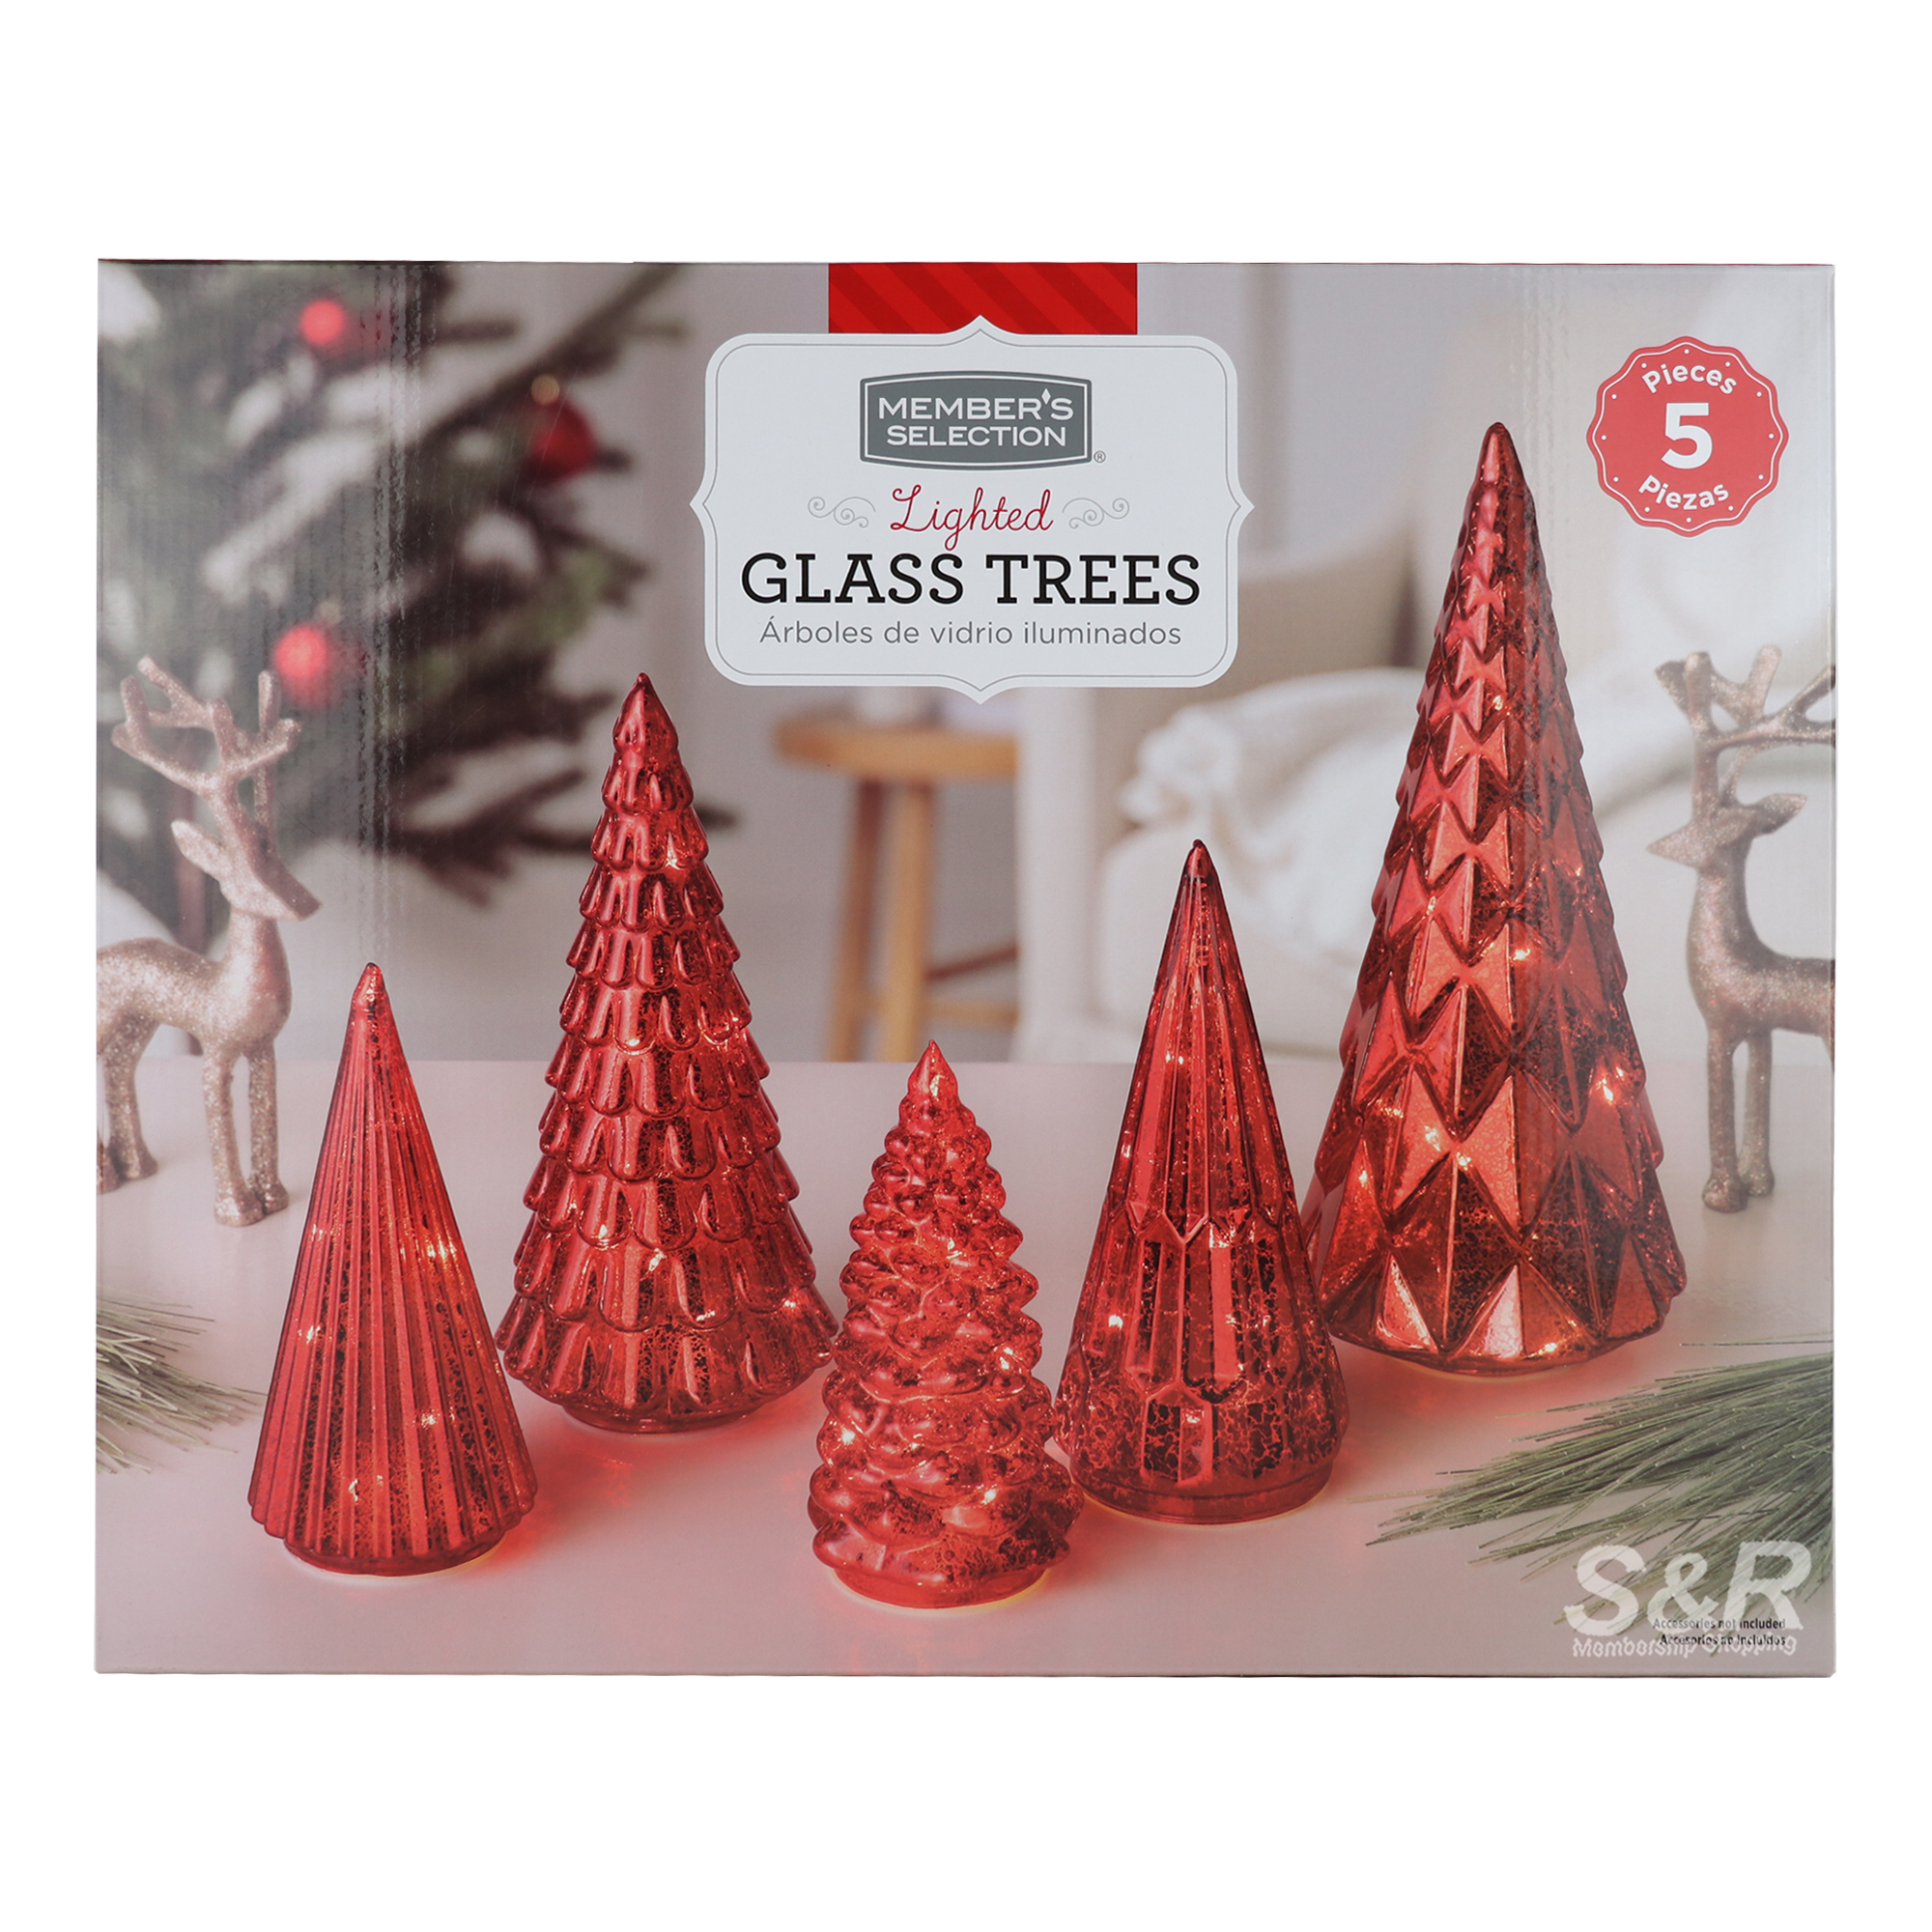 Member's Selection Lighted Glass Trees 5pcs